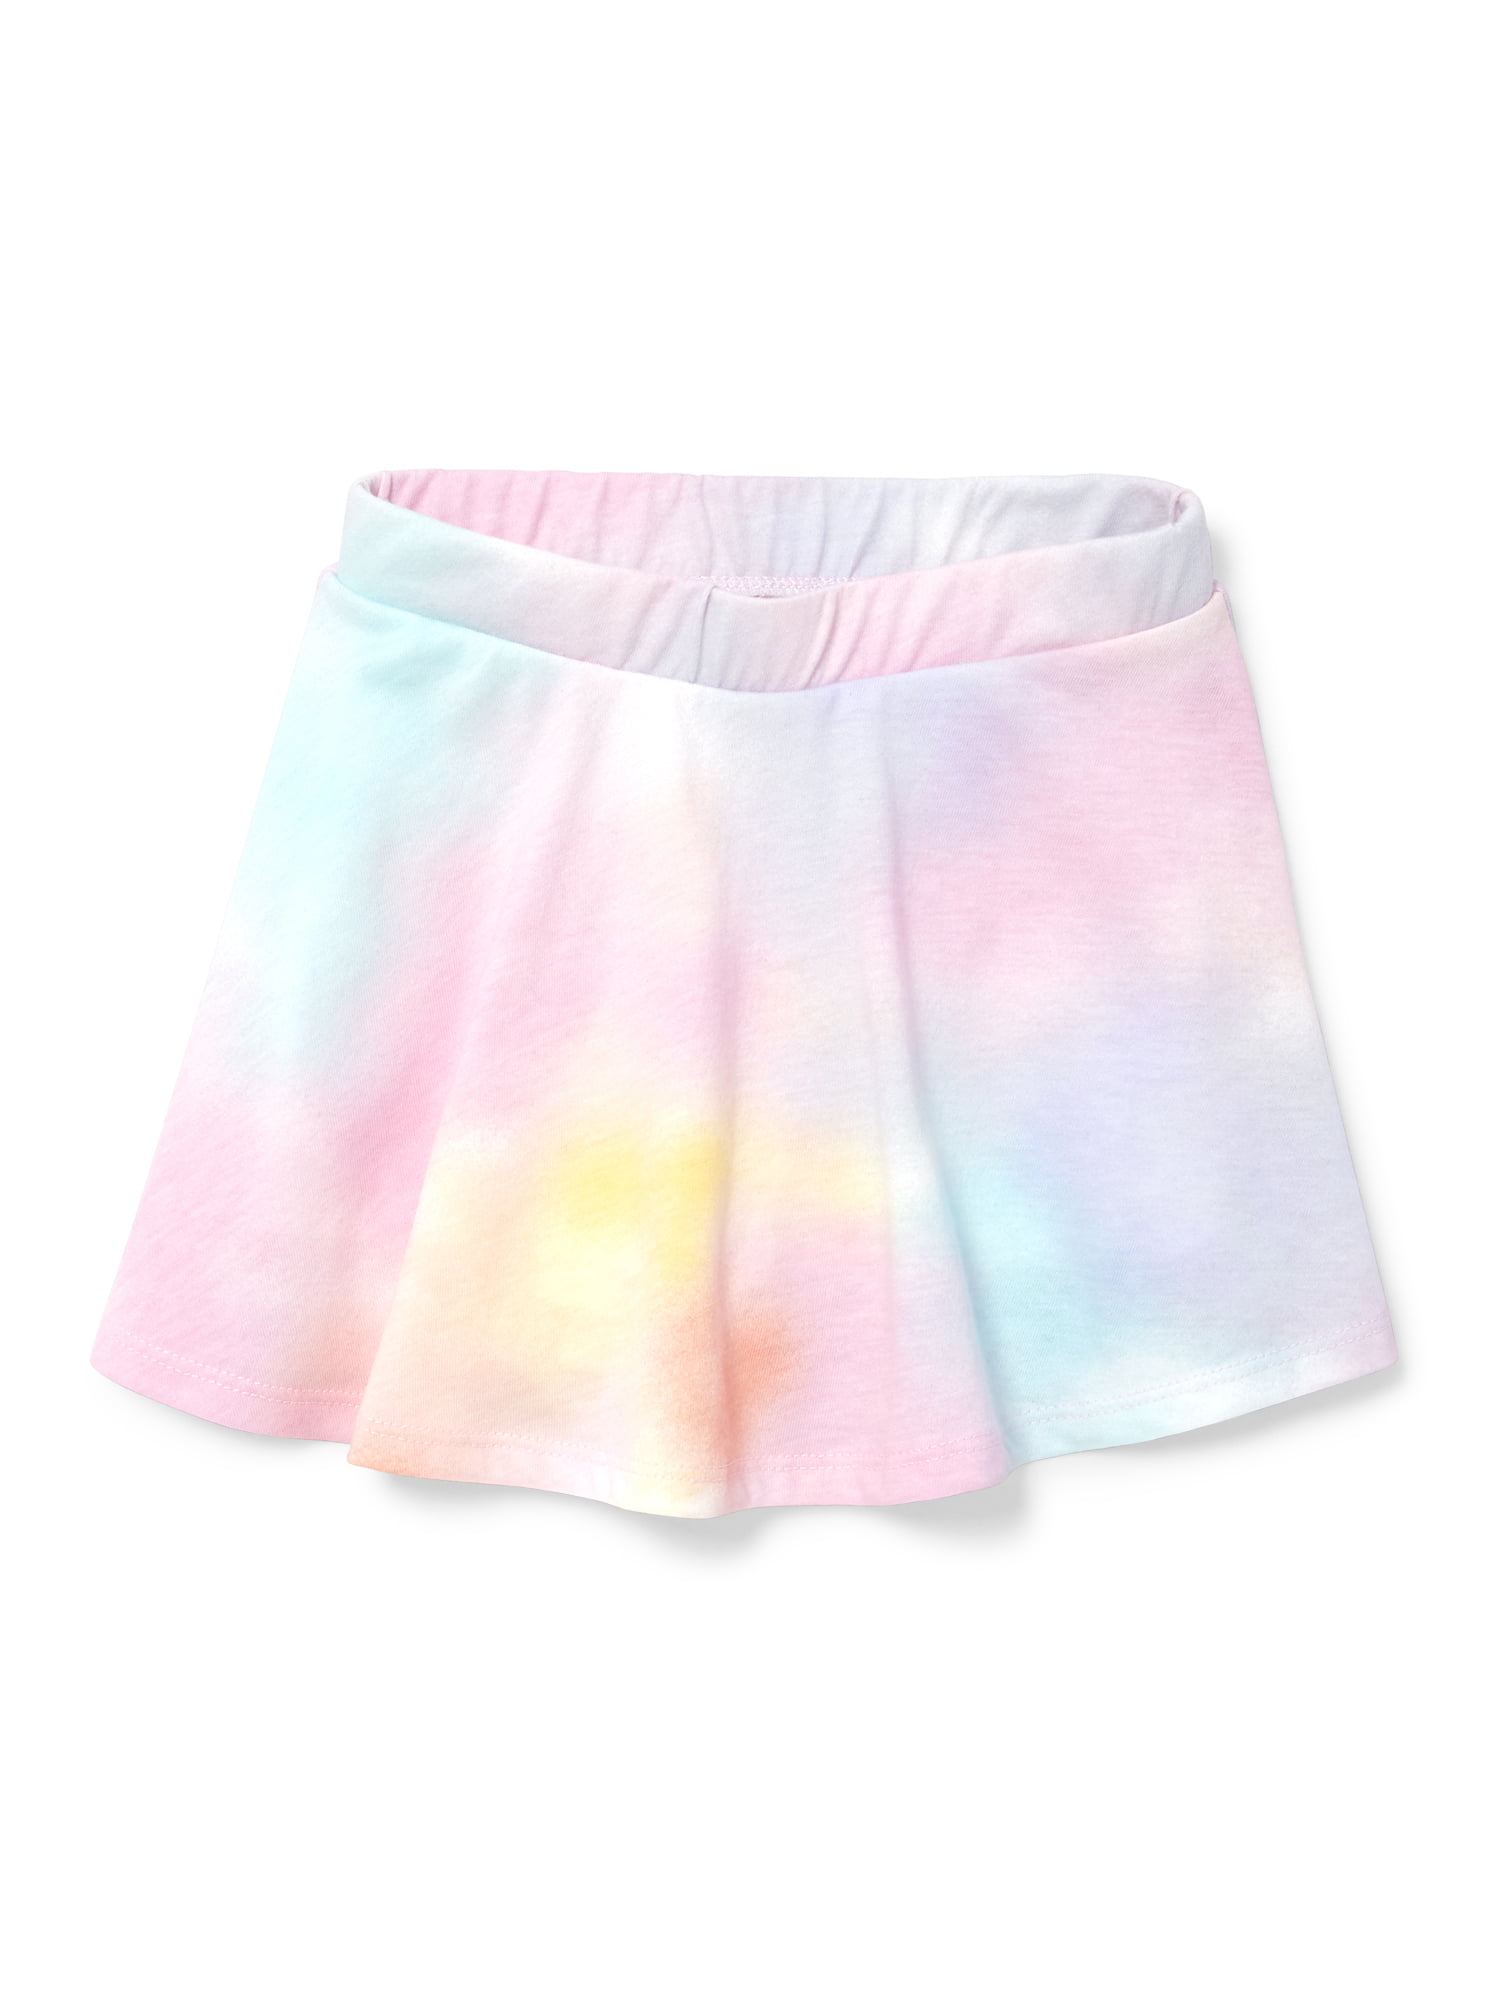 The Childrens Place Baby Girls Novelty Printed Matchable Skirts